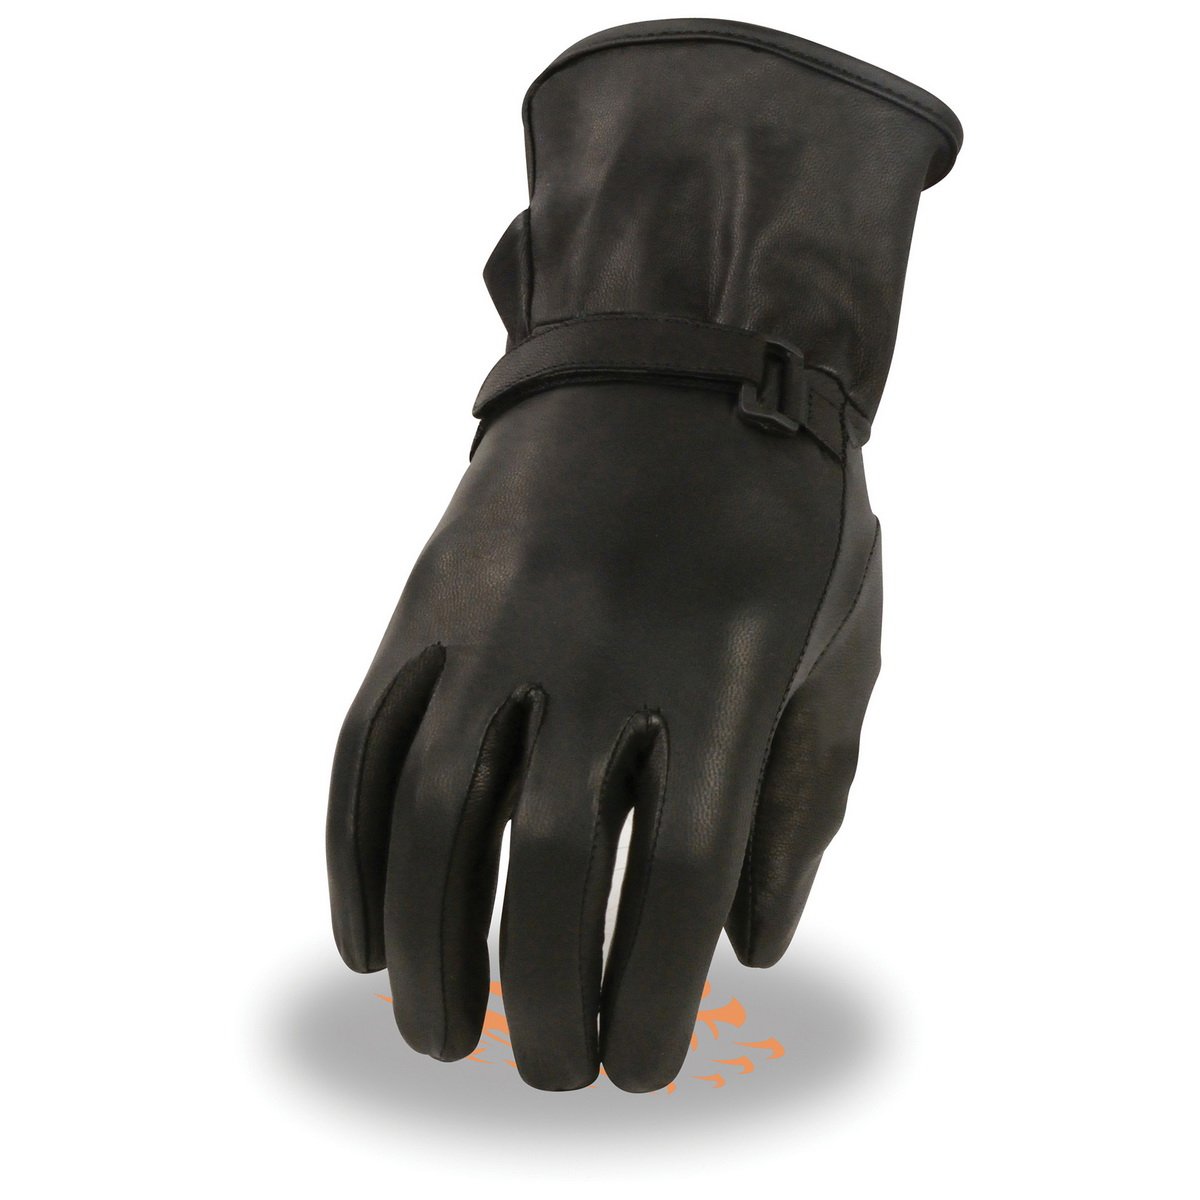 Milwaukee Leather MG7725 Women's Black Leather Gauntlet Motorcycle Hand Gloves W/ ‘Wrist Strap Closure and Lightly Lined’